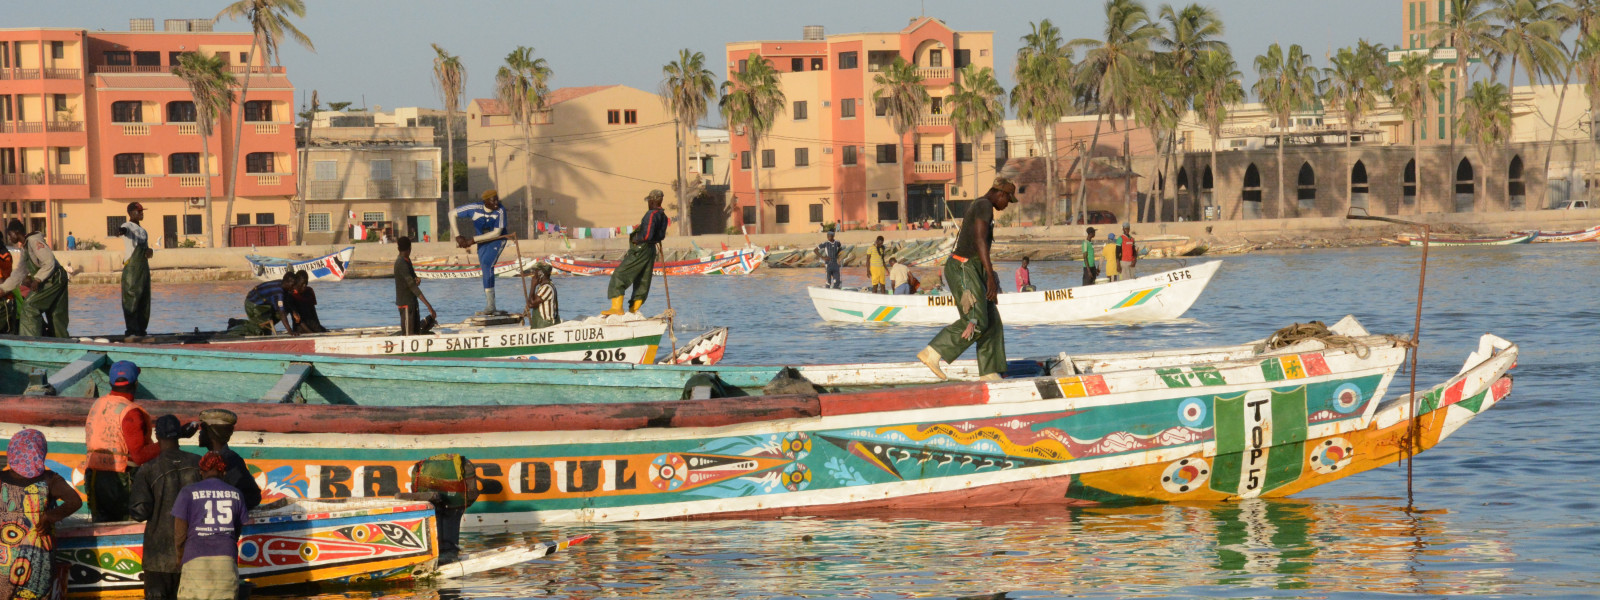 People are walking on and standing beside brightly painted boats by the shore.